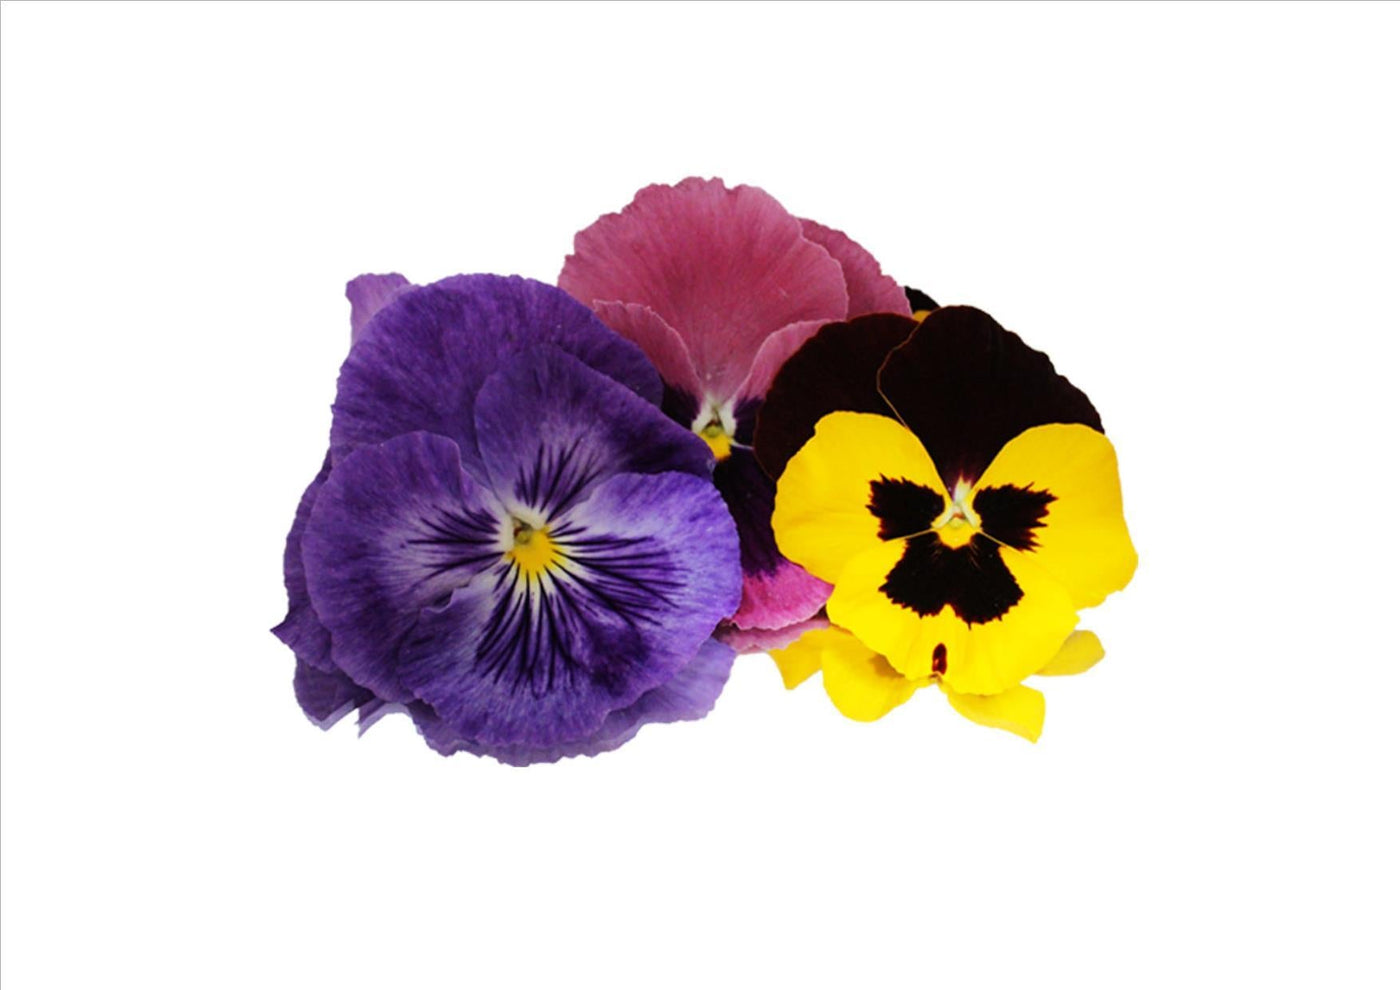 Edible Flower Cookies - Two Cups Flour